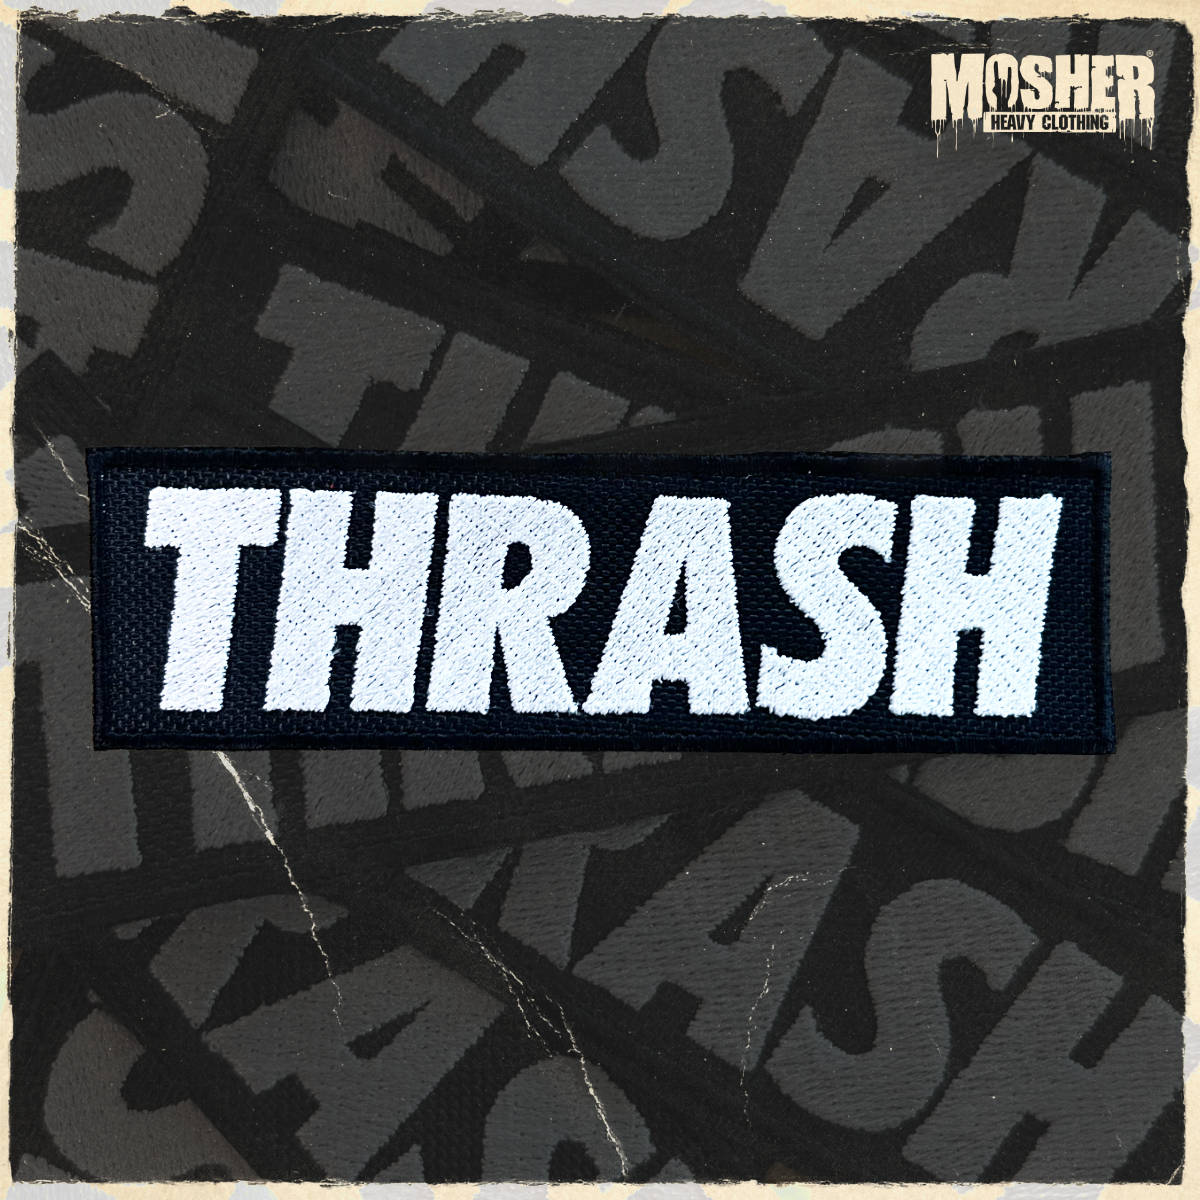 Thrash Patch for metalheads by Mosher Clothing